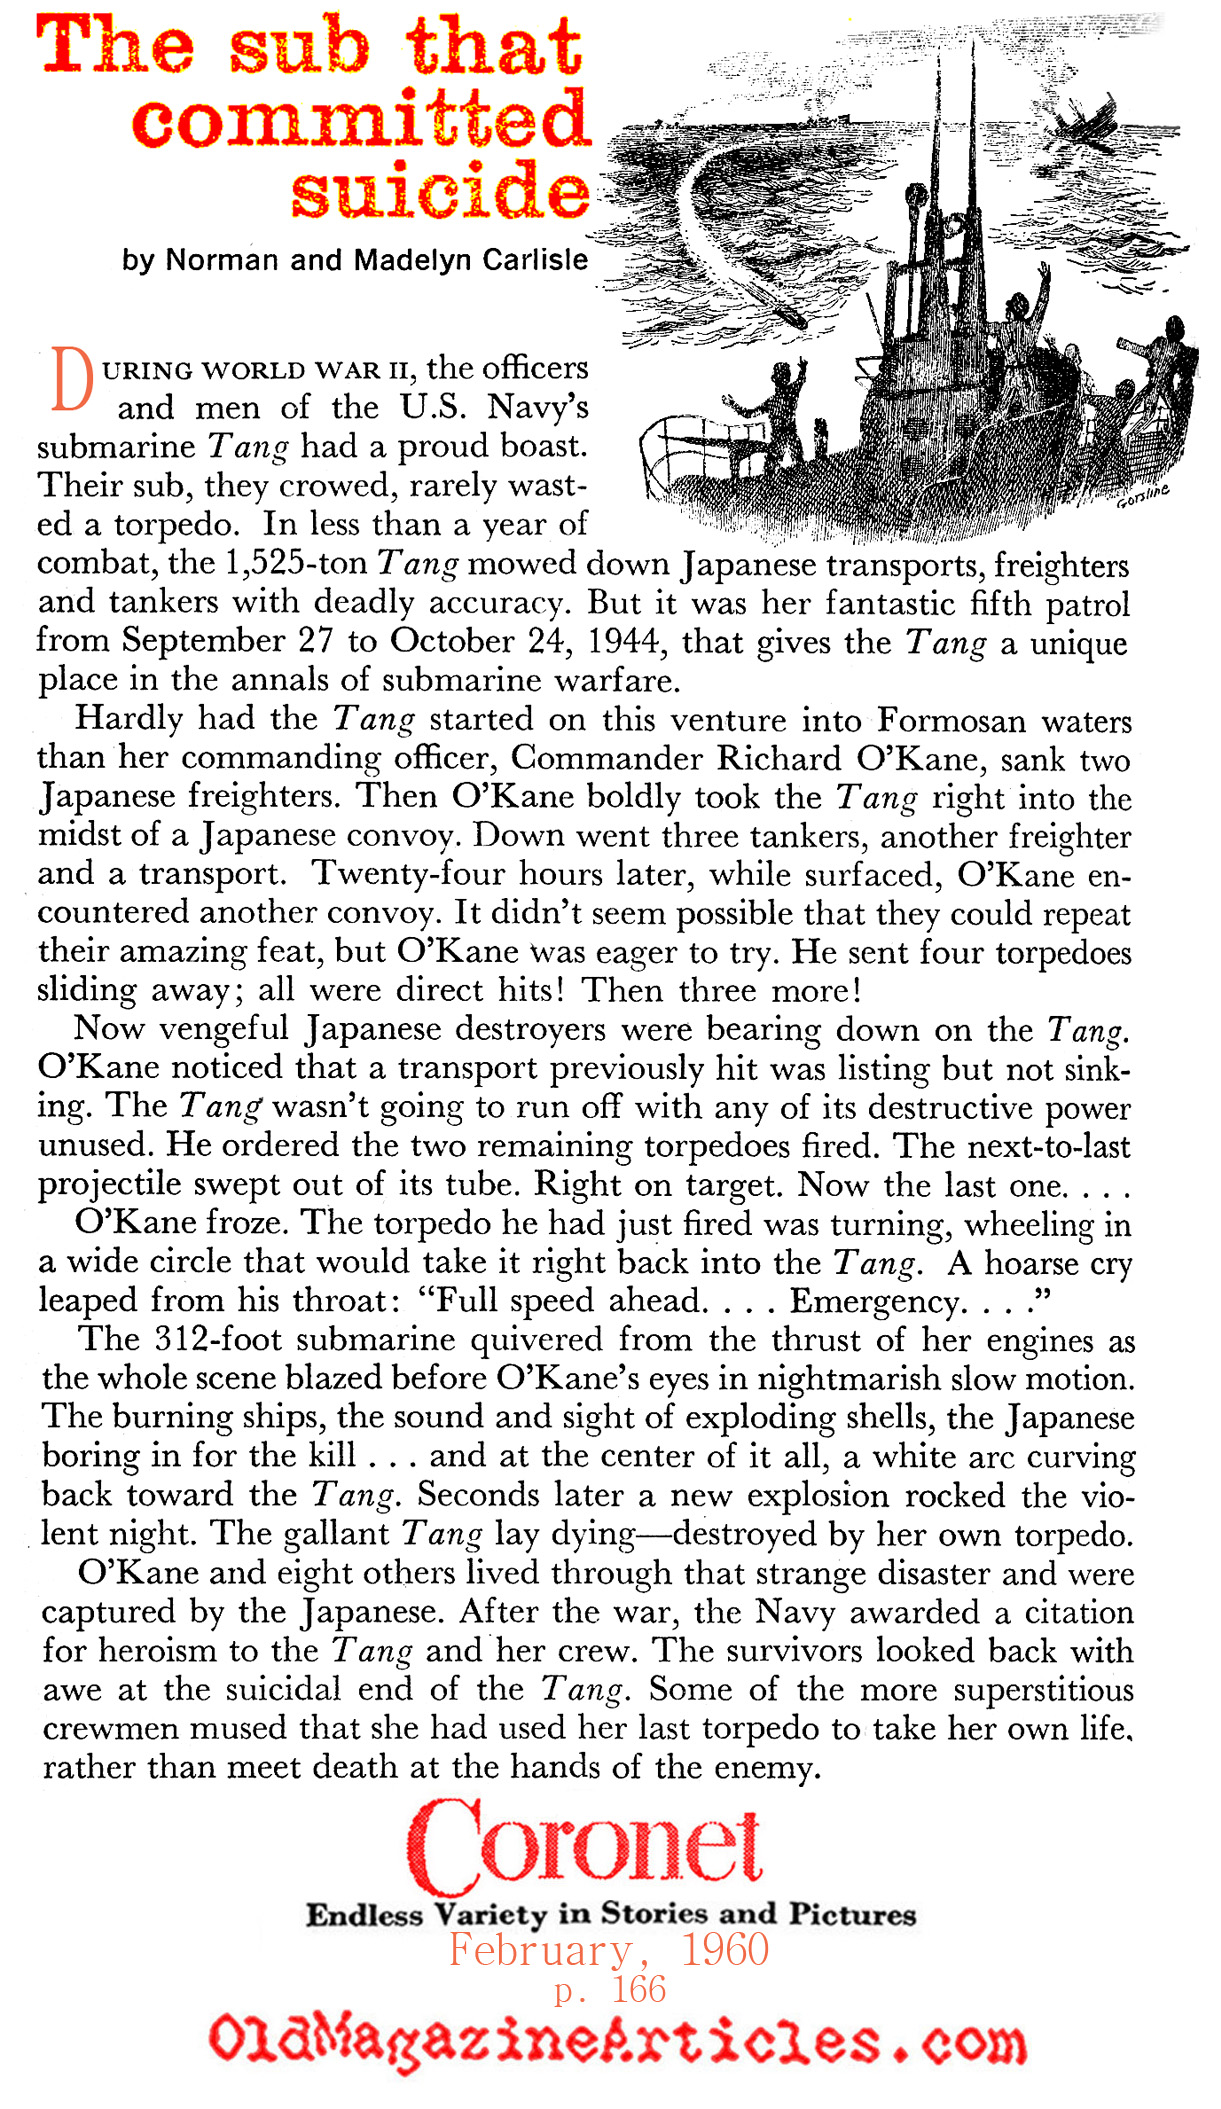 The Bizarre End of the USS TANG  (Coronet Magazine, 1960)